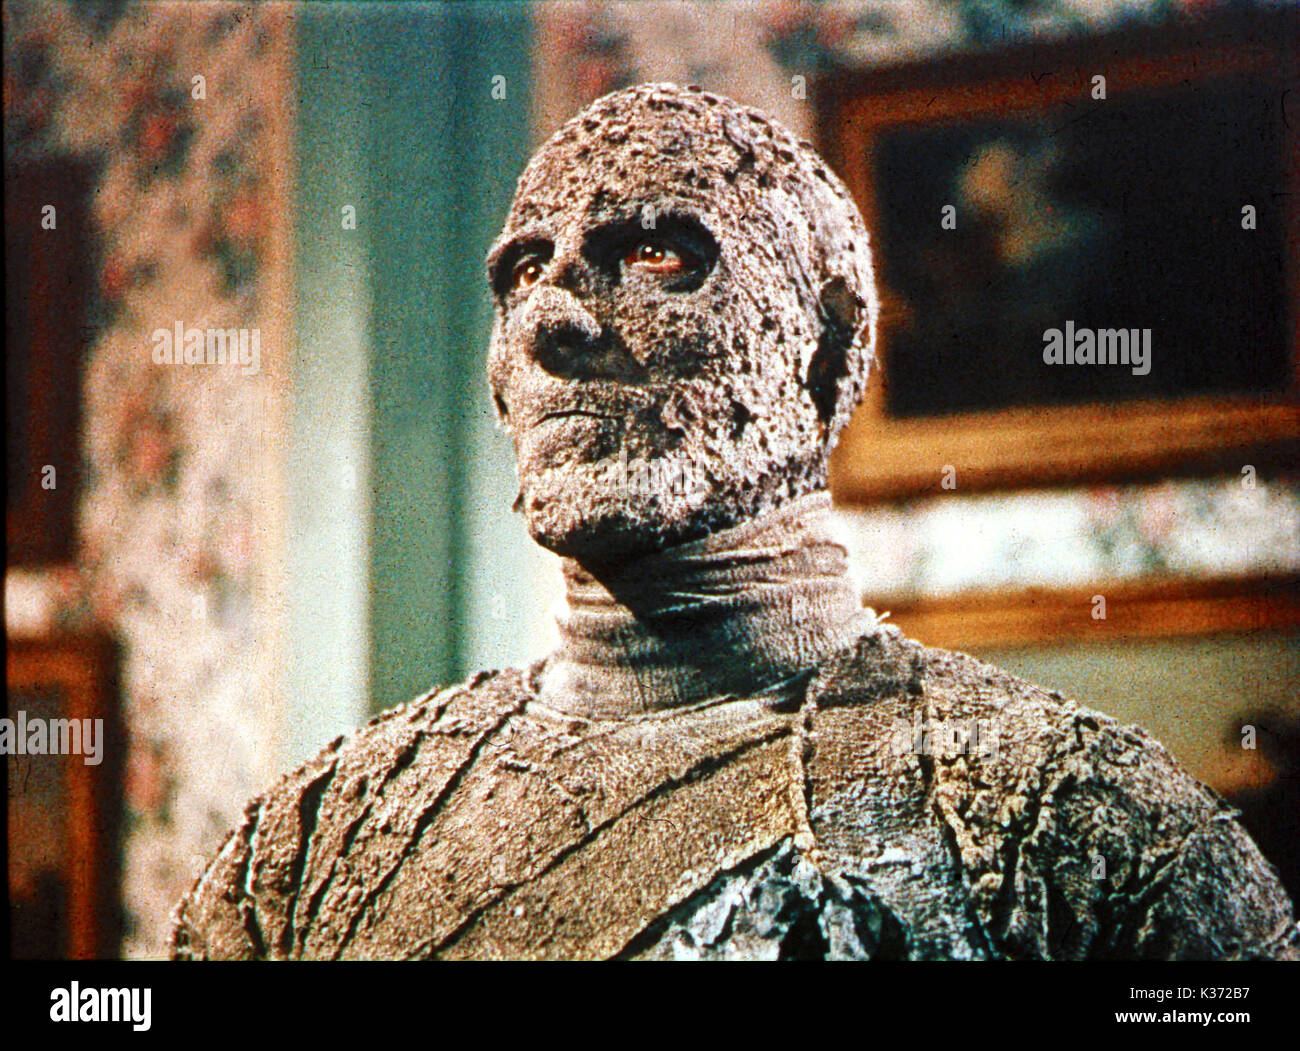 THE MUMMY HAMMER FILM PRODUCTIONS CHRISTOPHER LEE     Date: 1959 Stock Photo